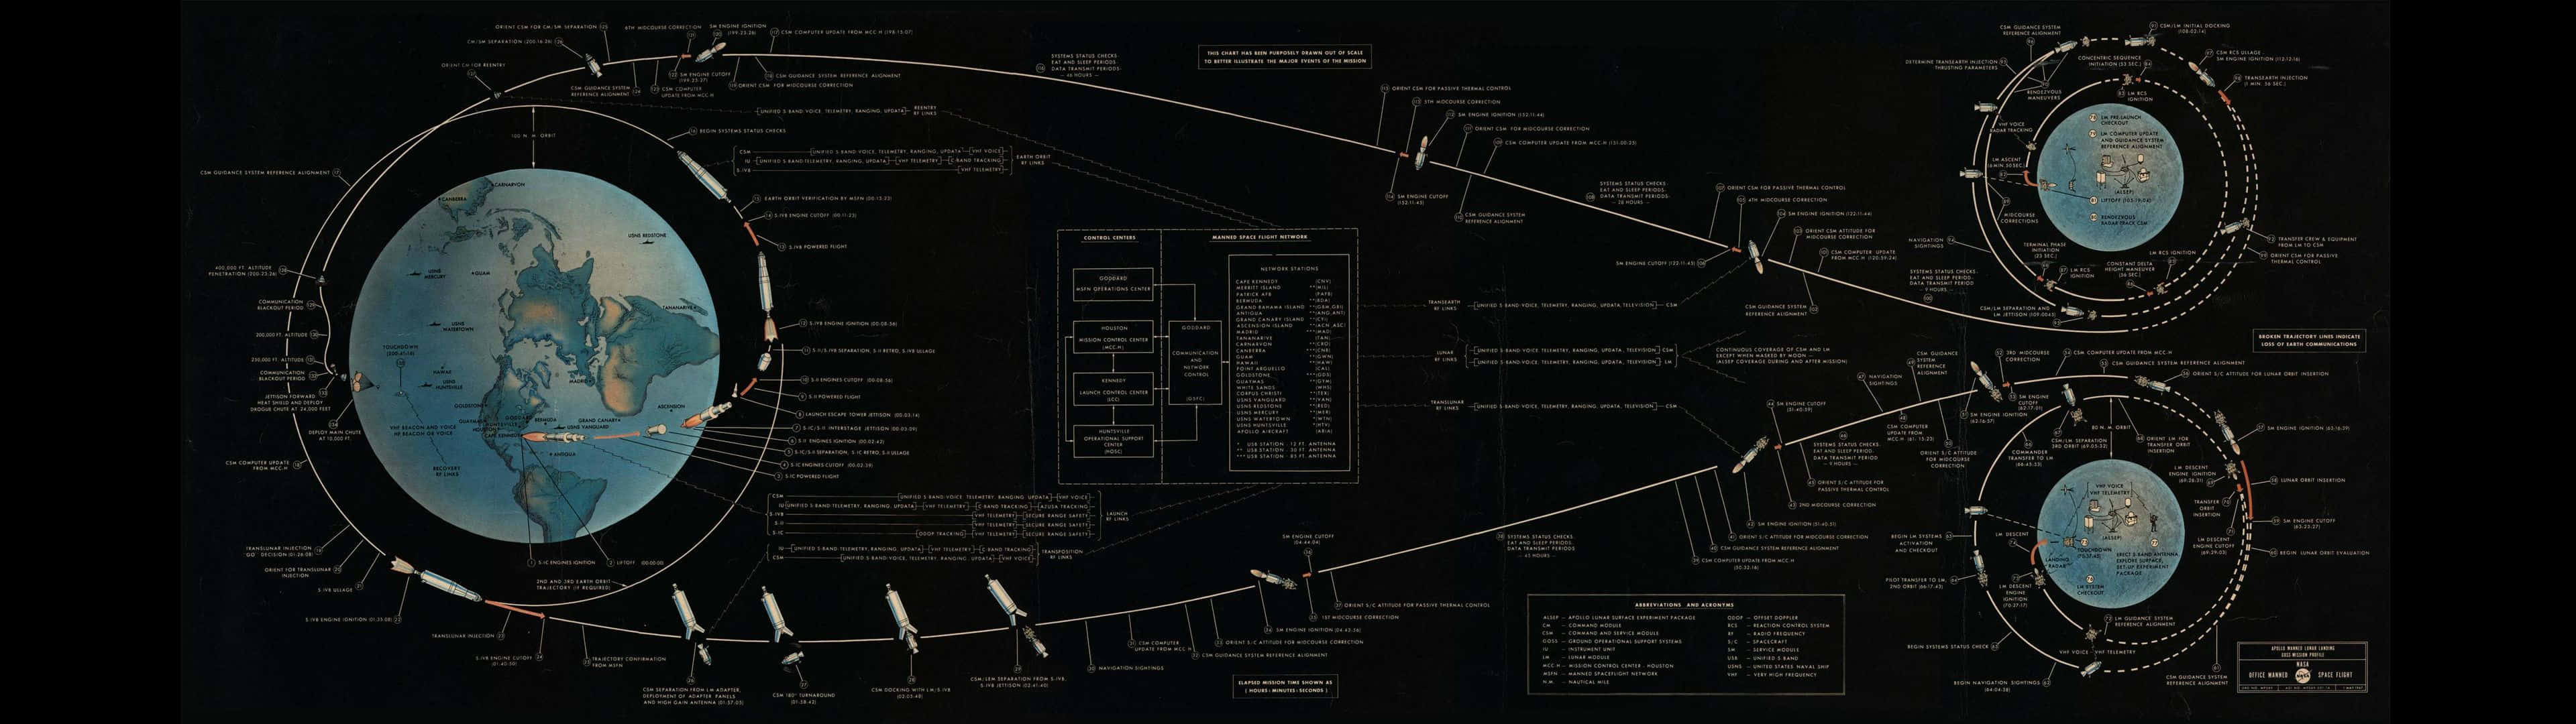 map of the spacecraft parts